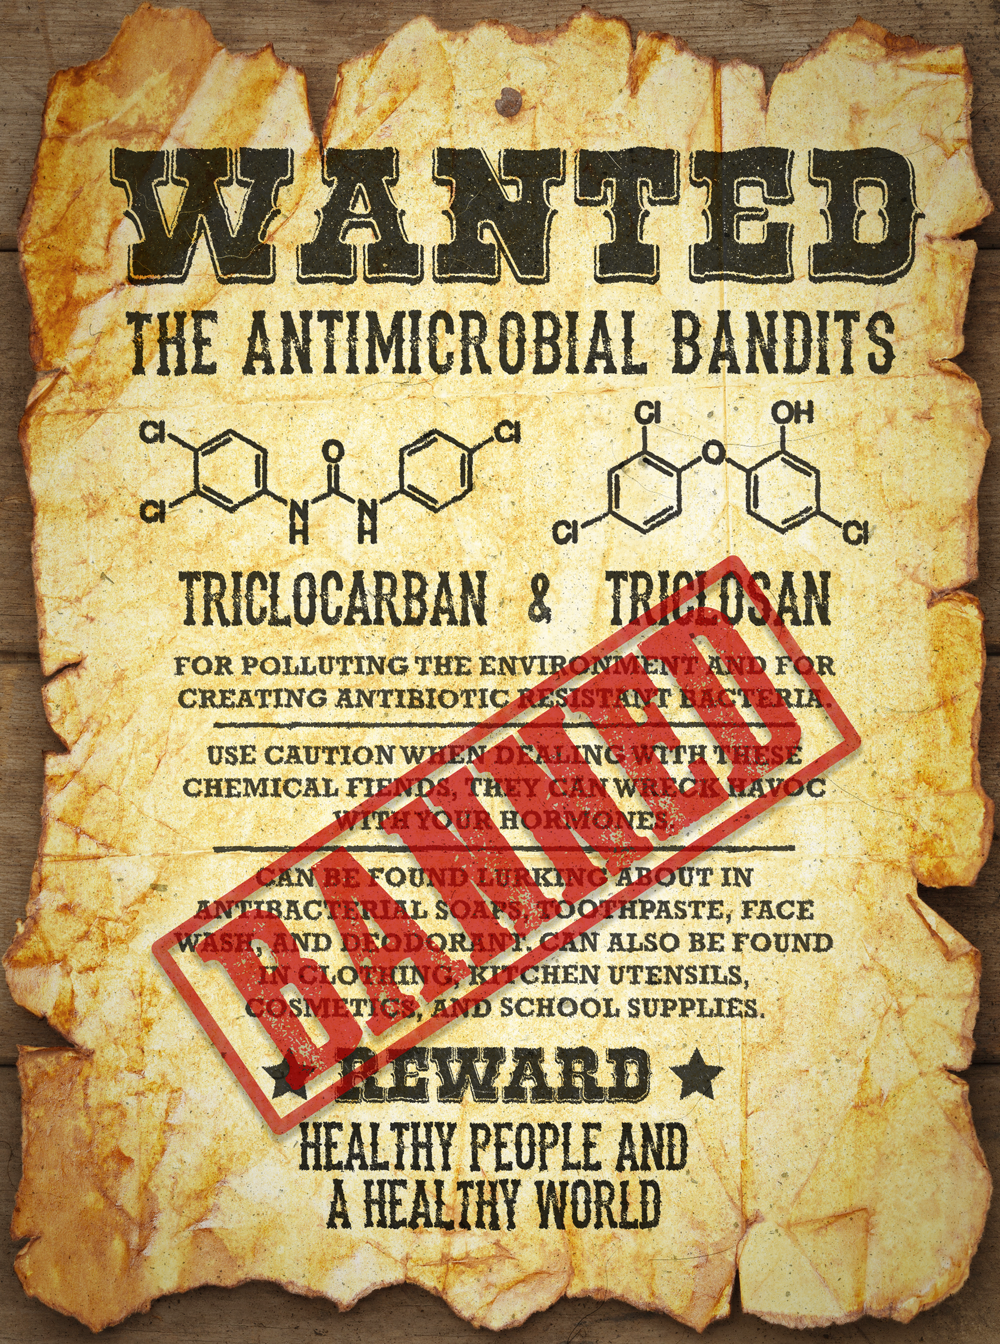 Scientists call for immediate halt to consumer use of 2 widespread antimicrobial chemicals - Arizona State University